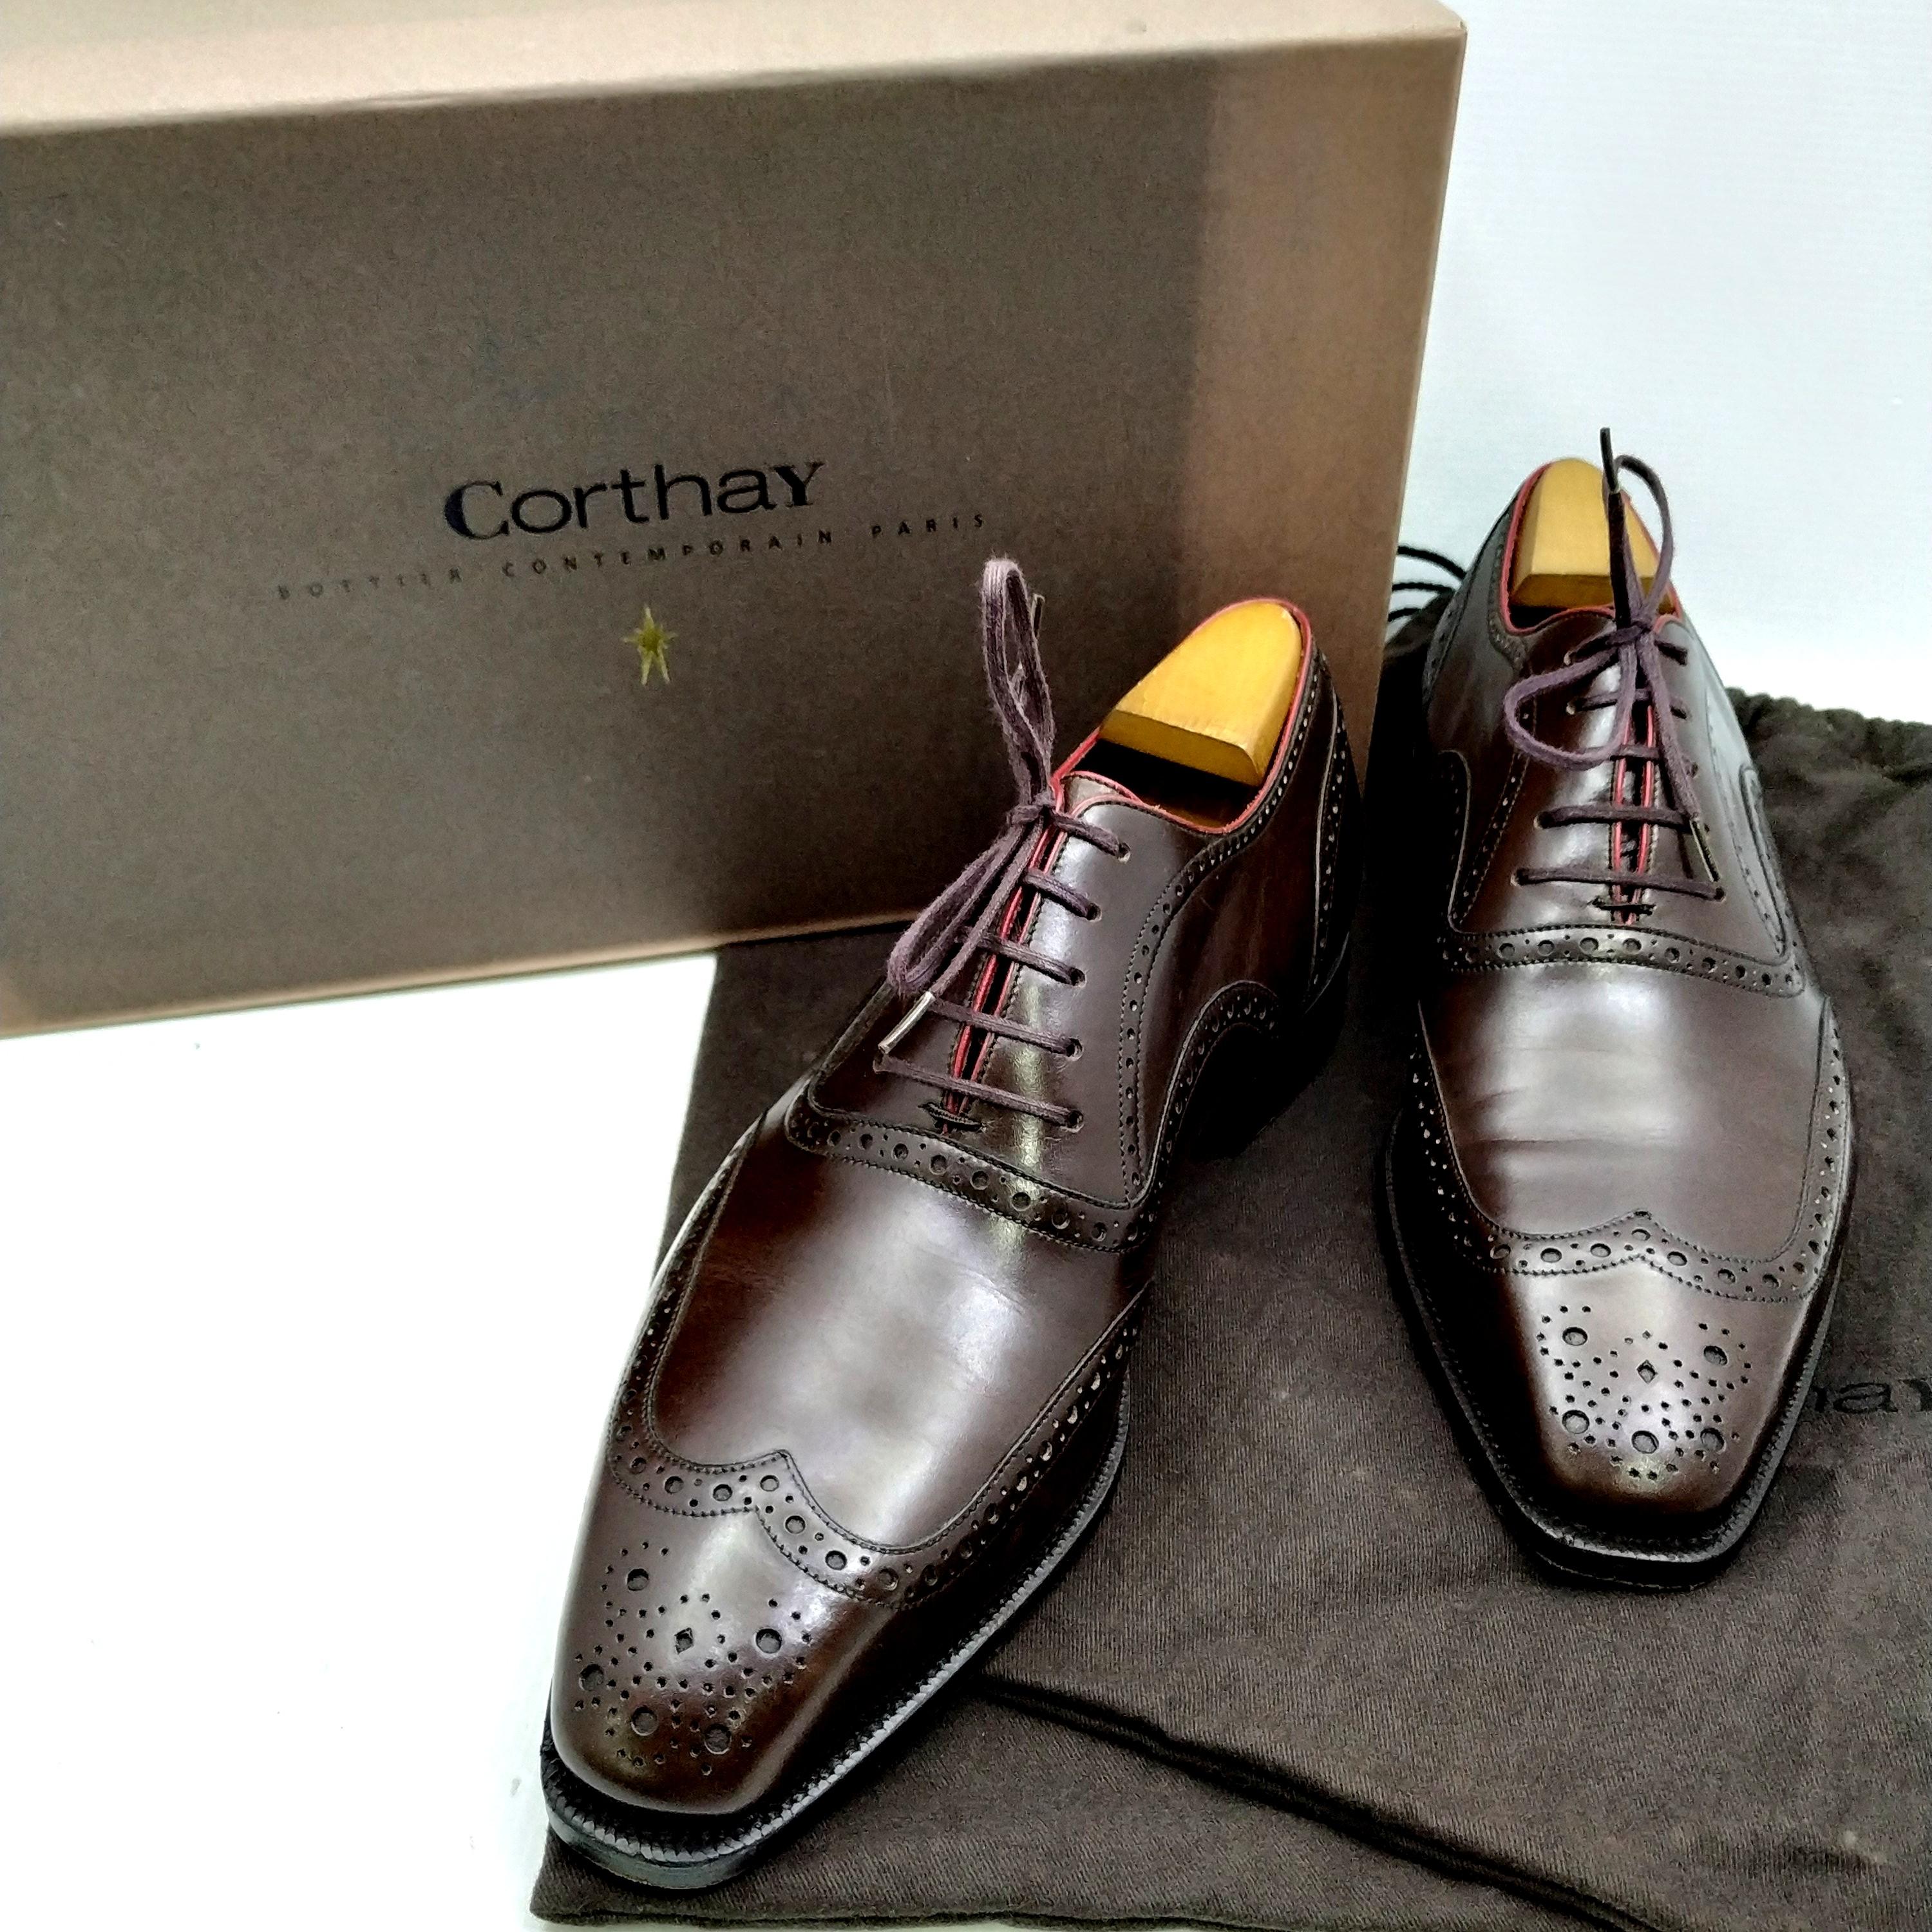 corthay shoes